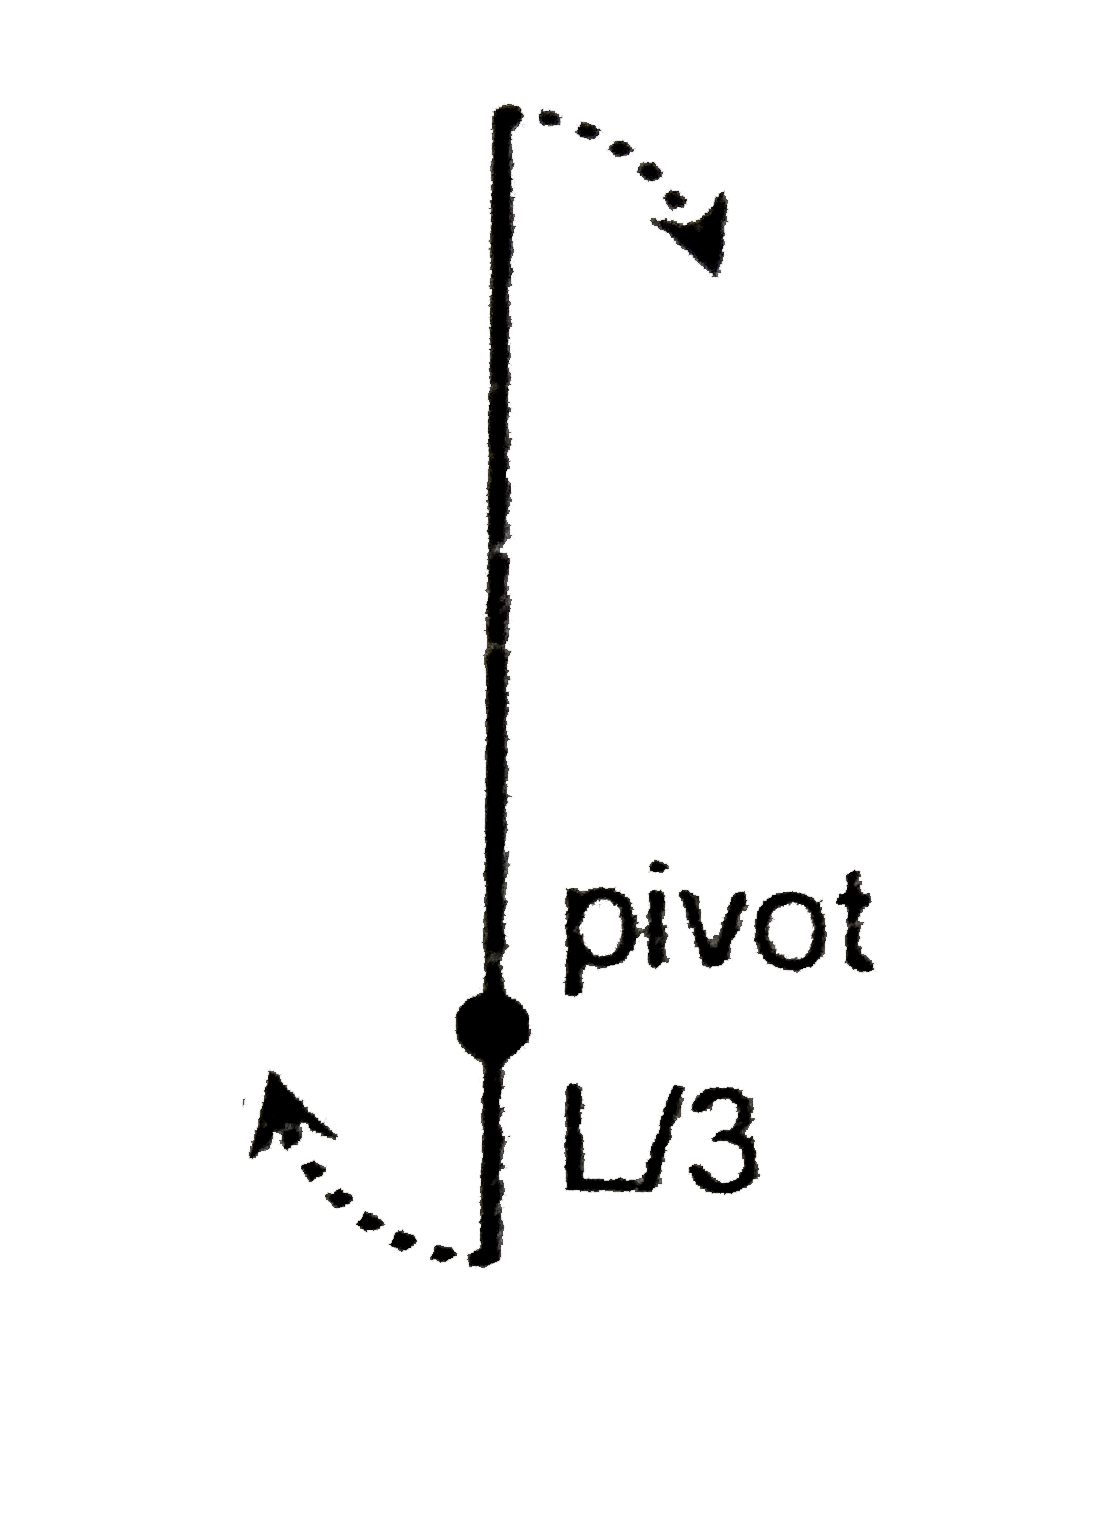 A uniform rod of mass M and length L is free to rotate about a frictionless pivot located L/3 from one end. The rod is released from rest incrementally away from being perfectly vertical, resulting in the rod rotating clockwise about the pivot. when the rod is horzontal what is the magnitude of the tangential acceleration of its center of mass?